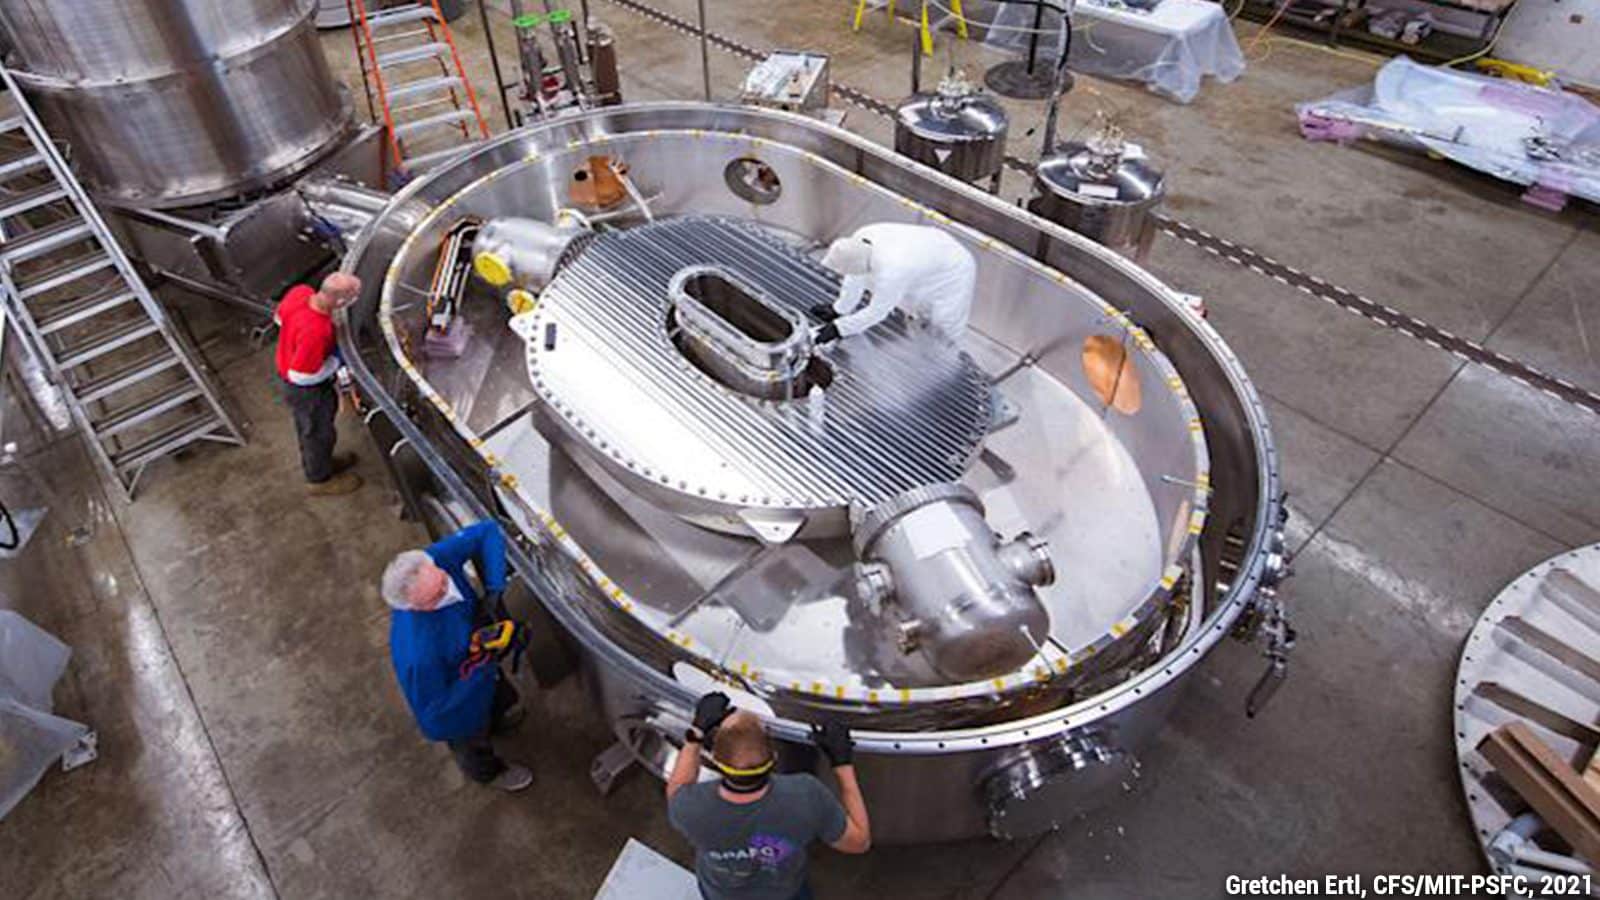 New Superconducting Magnet Could Make Fusion Energy by 2025